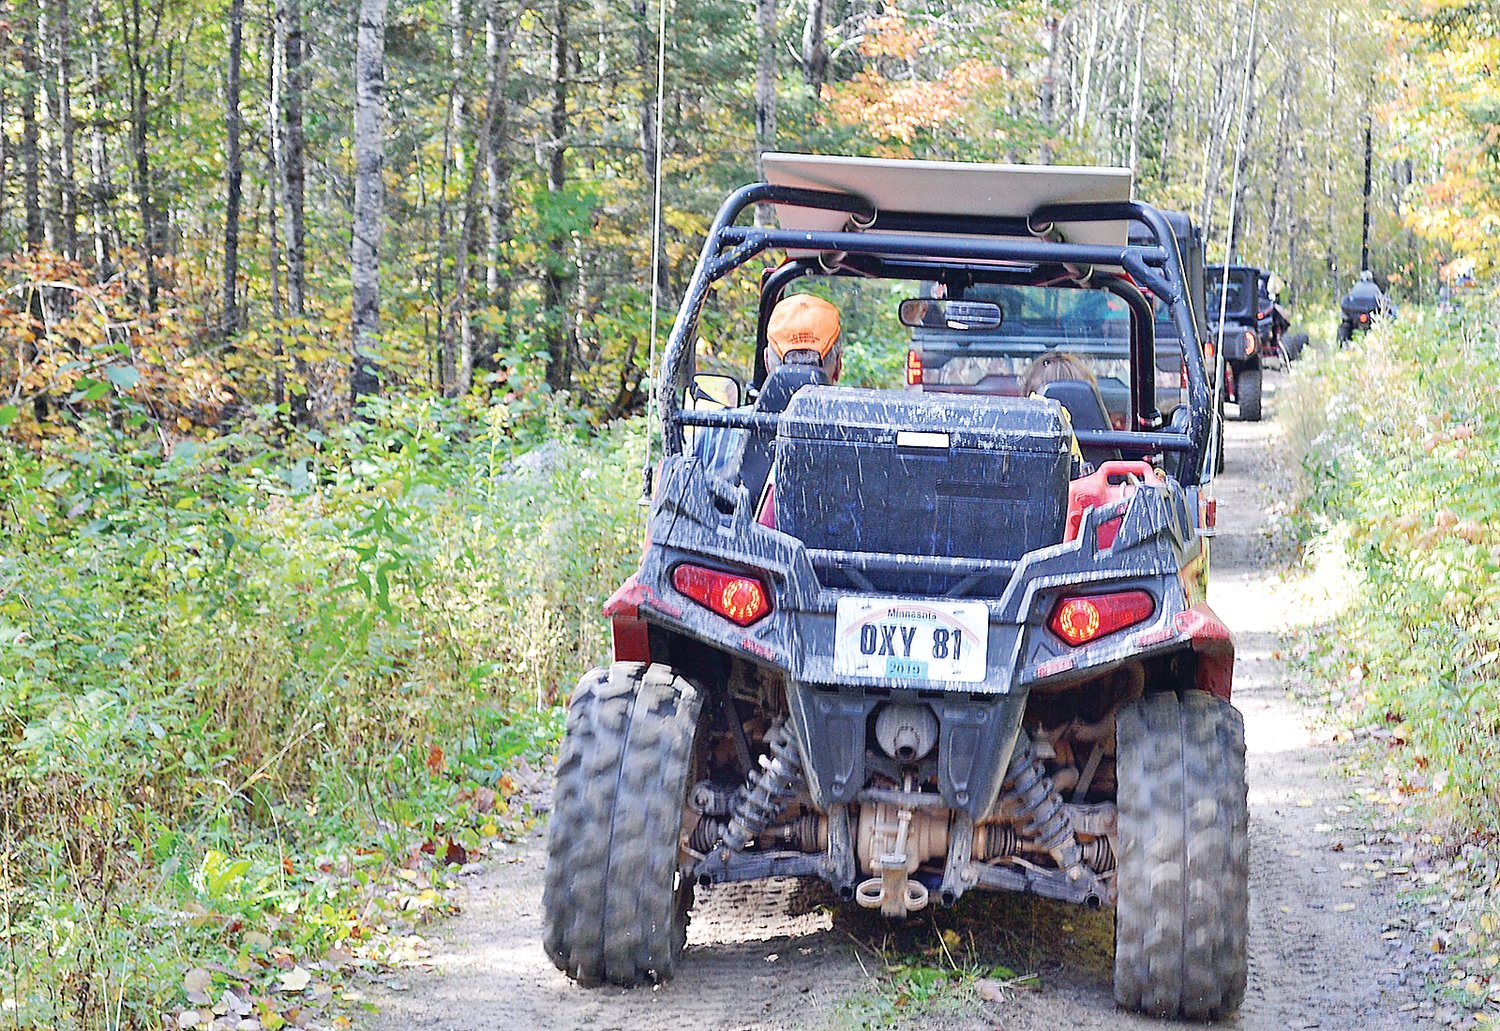 Eagles Nest Township has banned ATVs like these from using a township road.